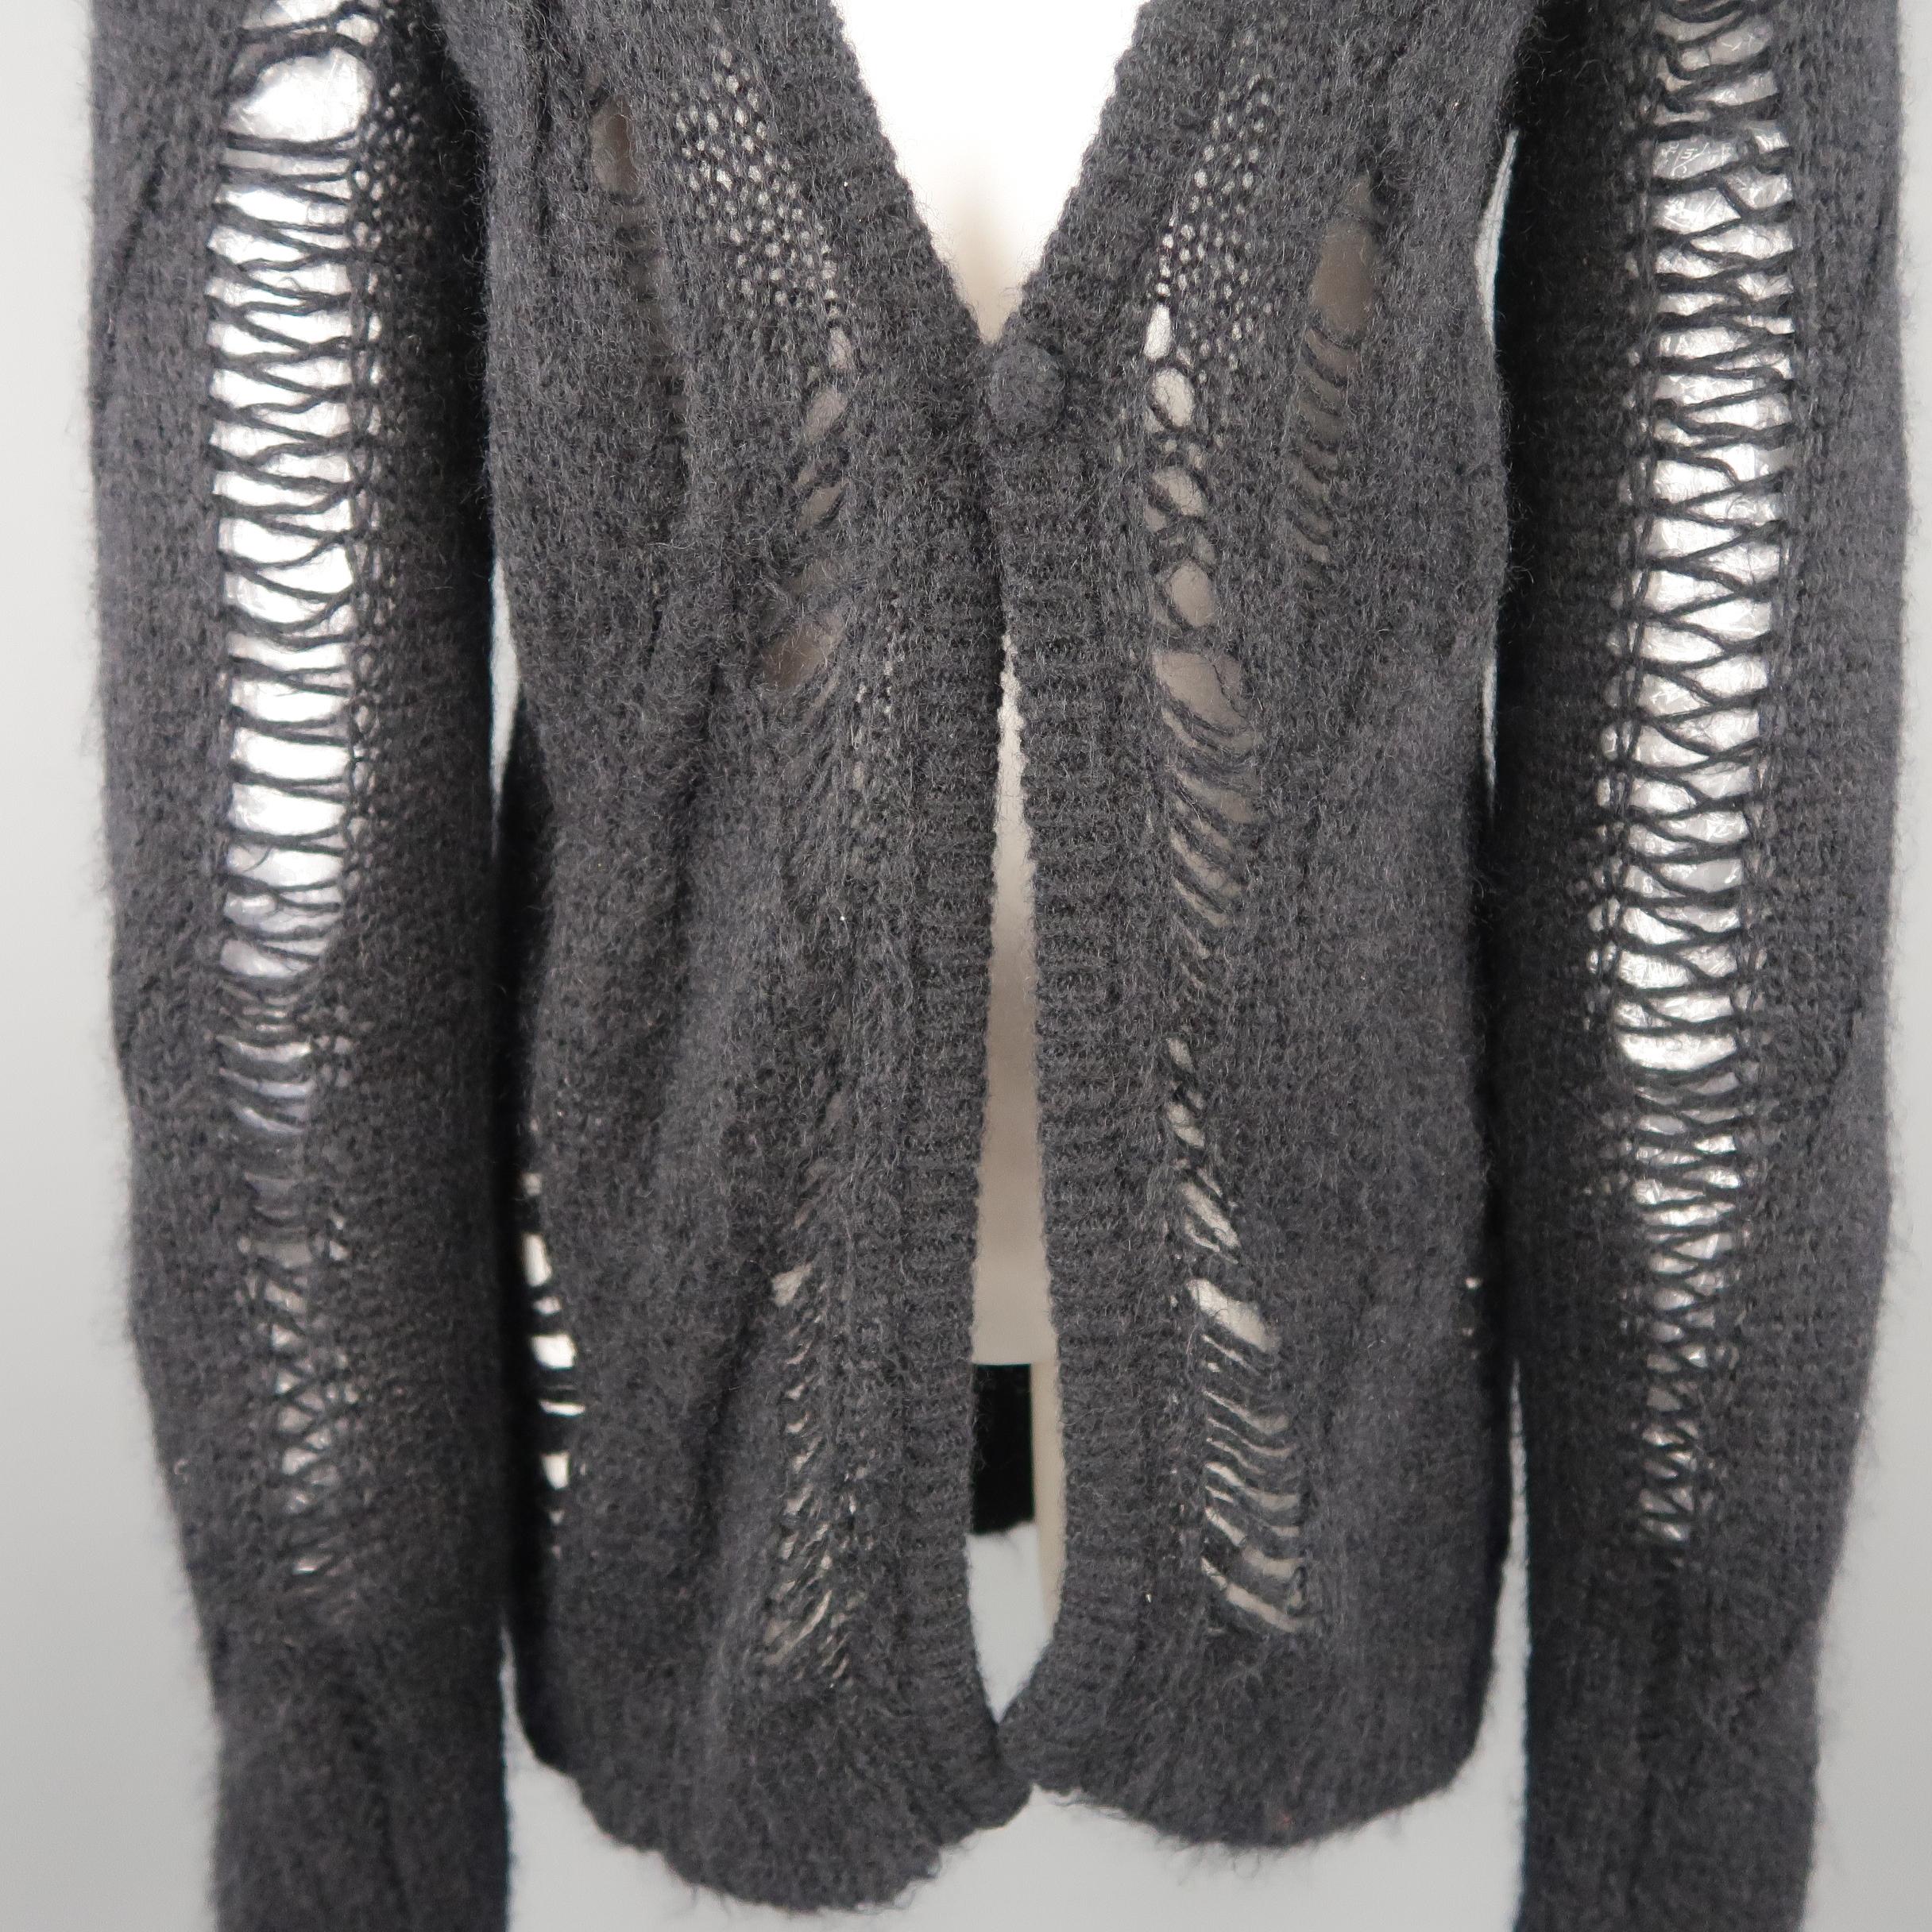 GIVENCHY by RICCARDO TISCI cardigan comes in a fuzzy wool mohair blend cable knit with all over distressing details, deep V neck, oversized silhouette, and single button closure. Care tag removed.
 
Excellent Pre-Owned Condition.
Marked: (no size)
